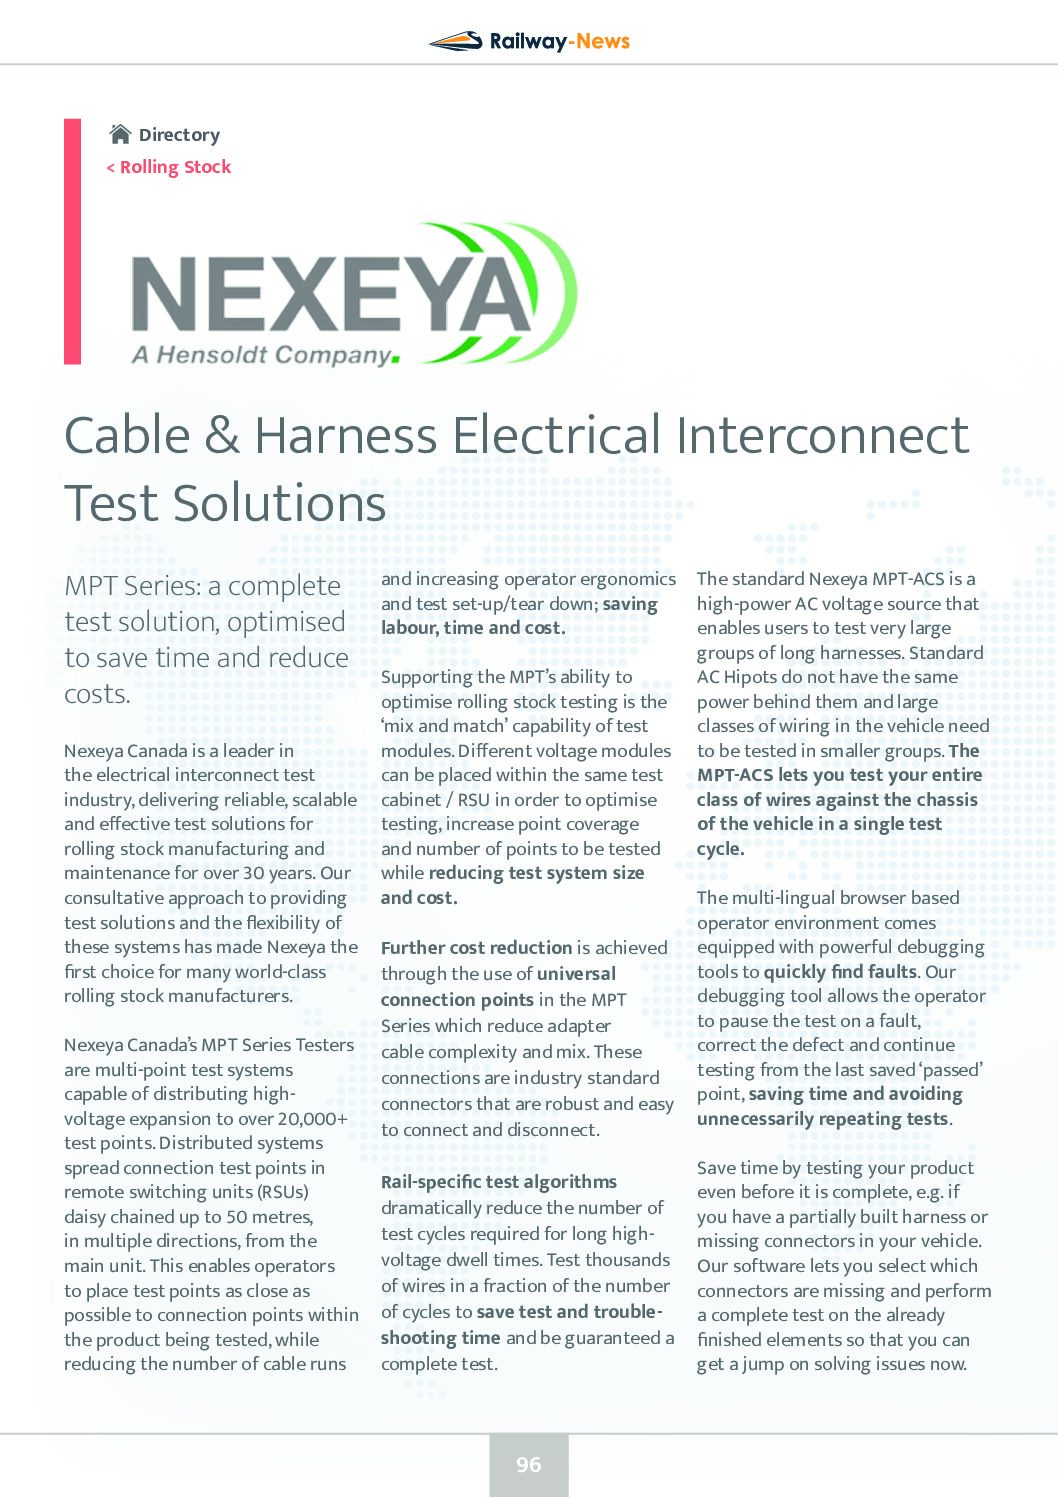 Cable & Harness Electrical Interconnect Test Solutions